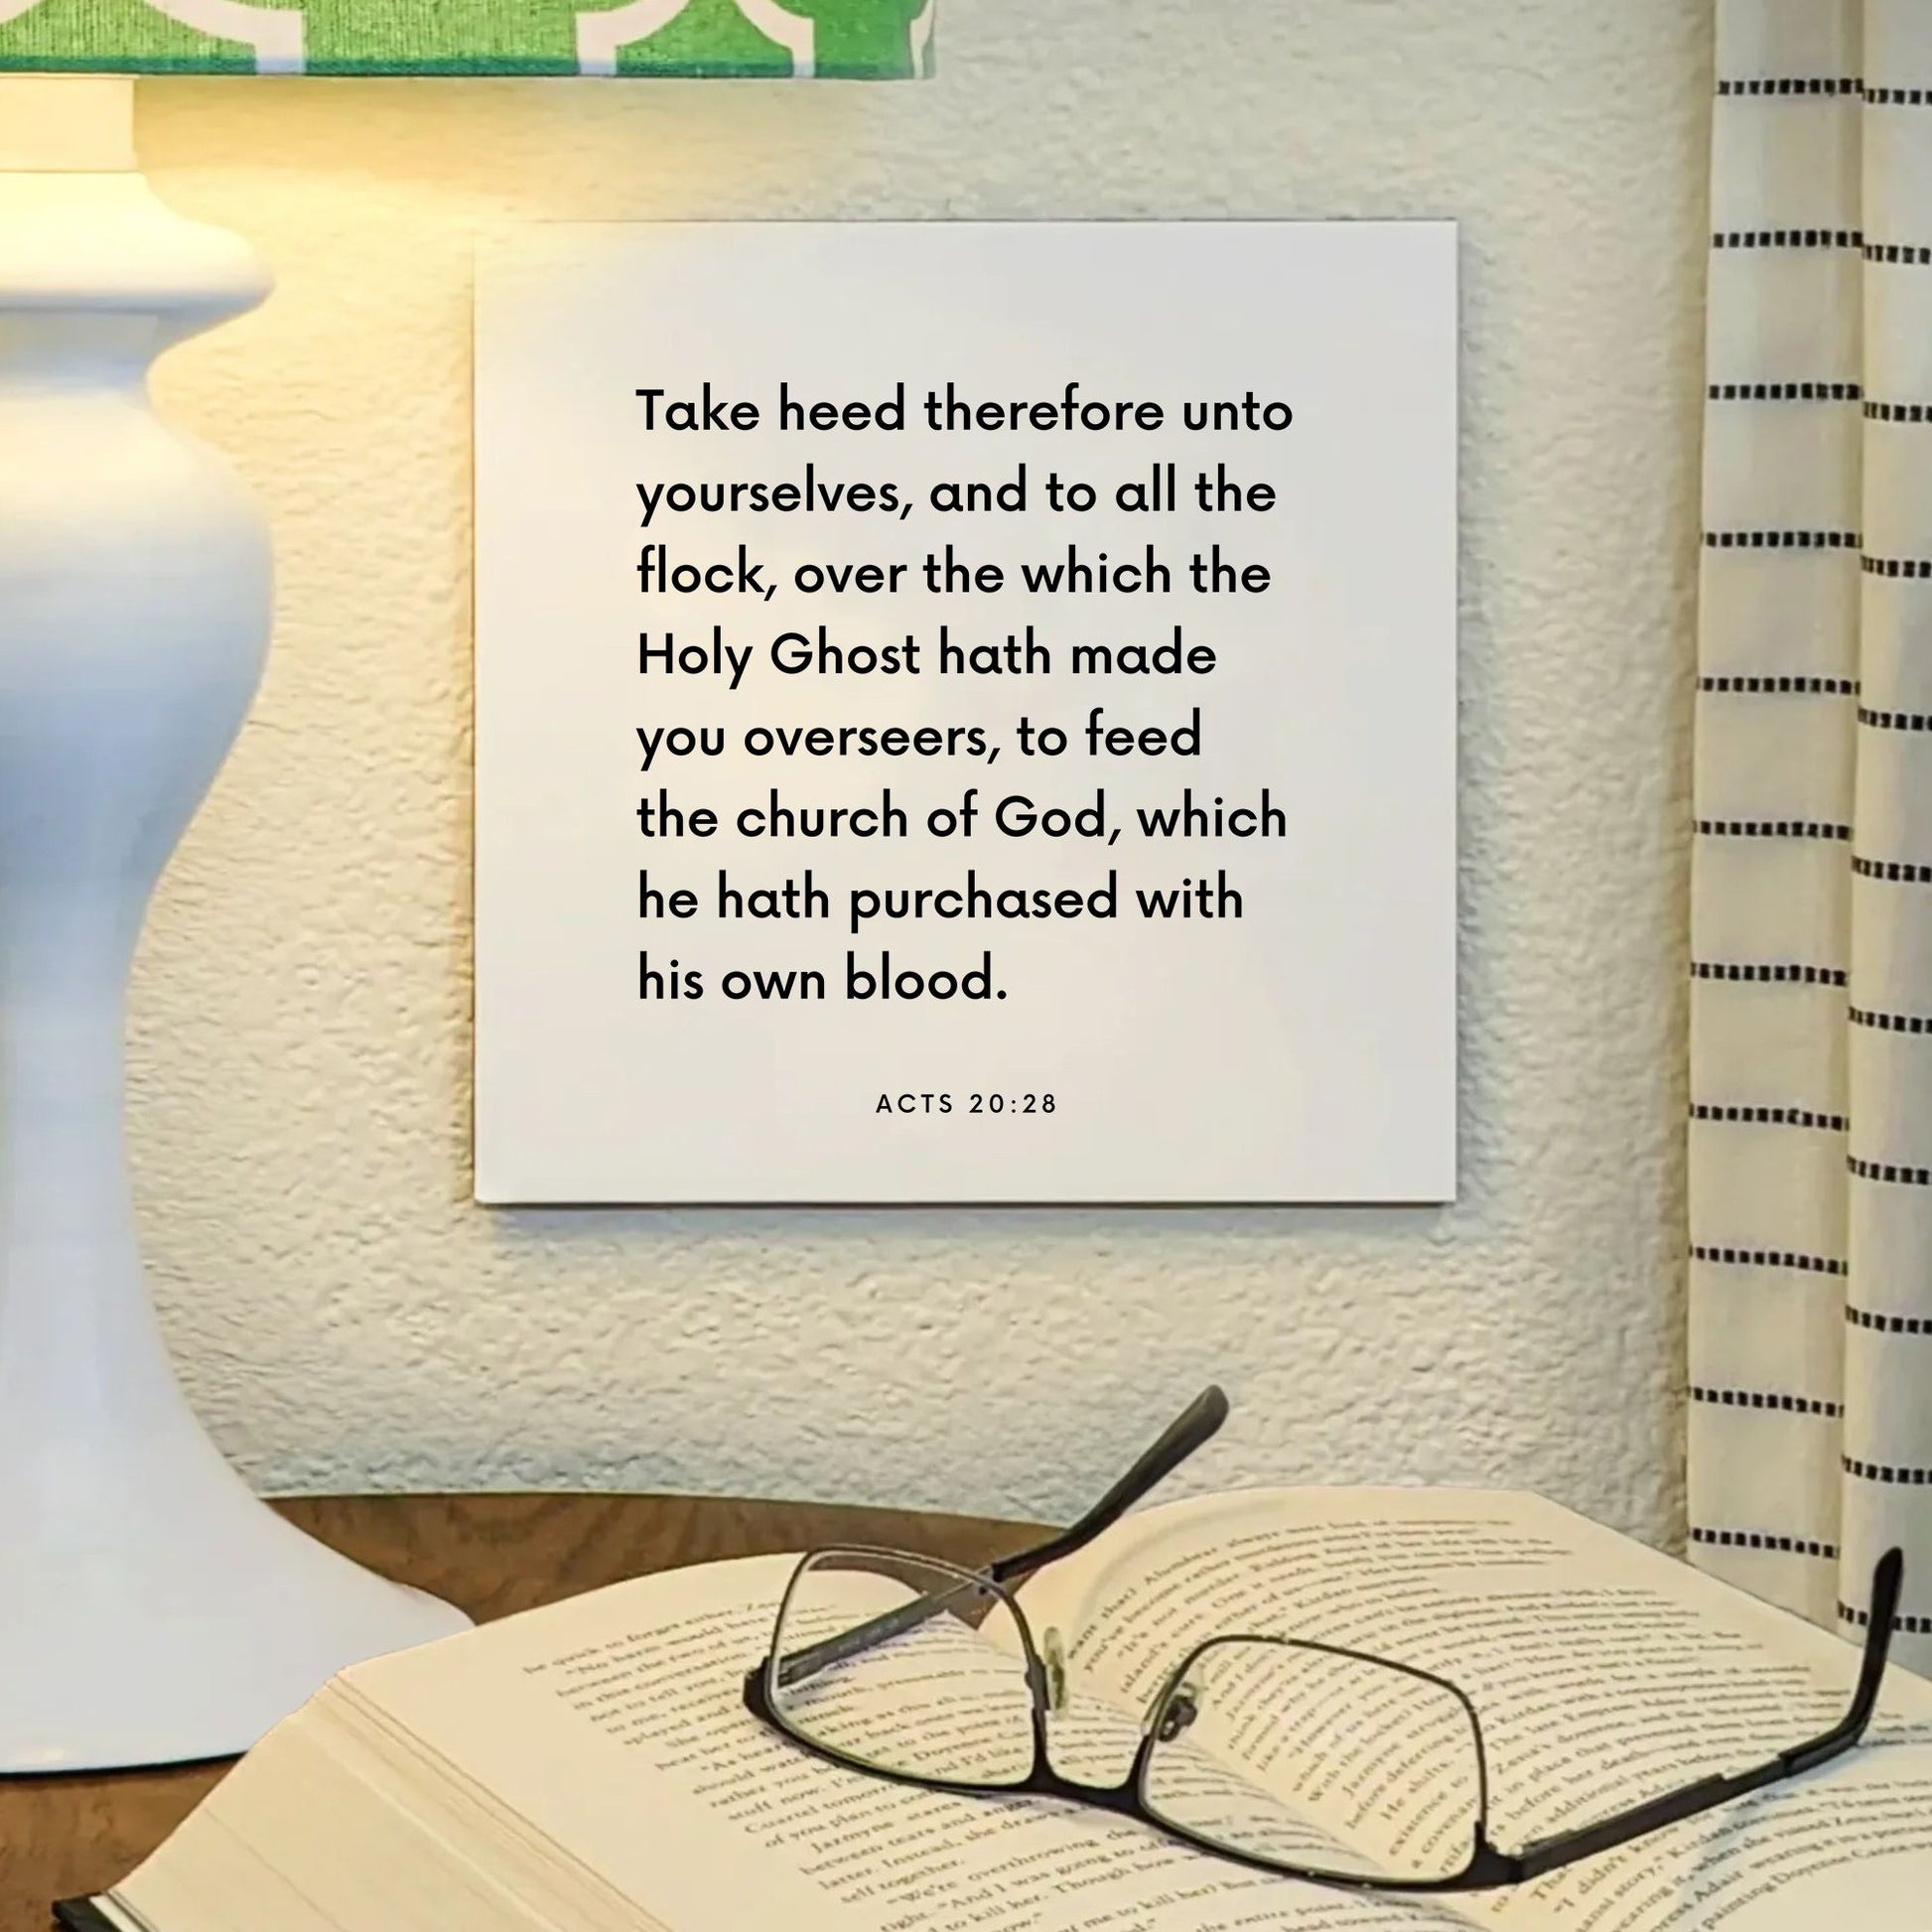 Lamp mouting of the scripture tile for Acts 20:28 - "Take heed therefore to feed the church of God"